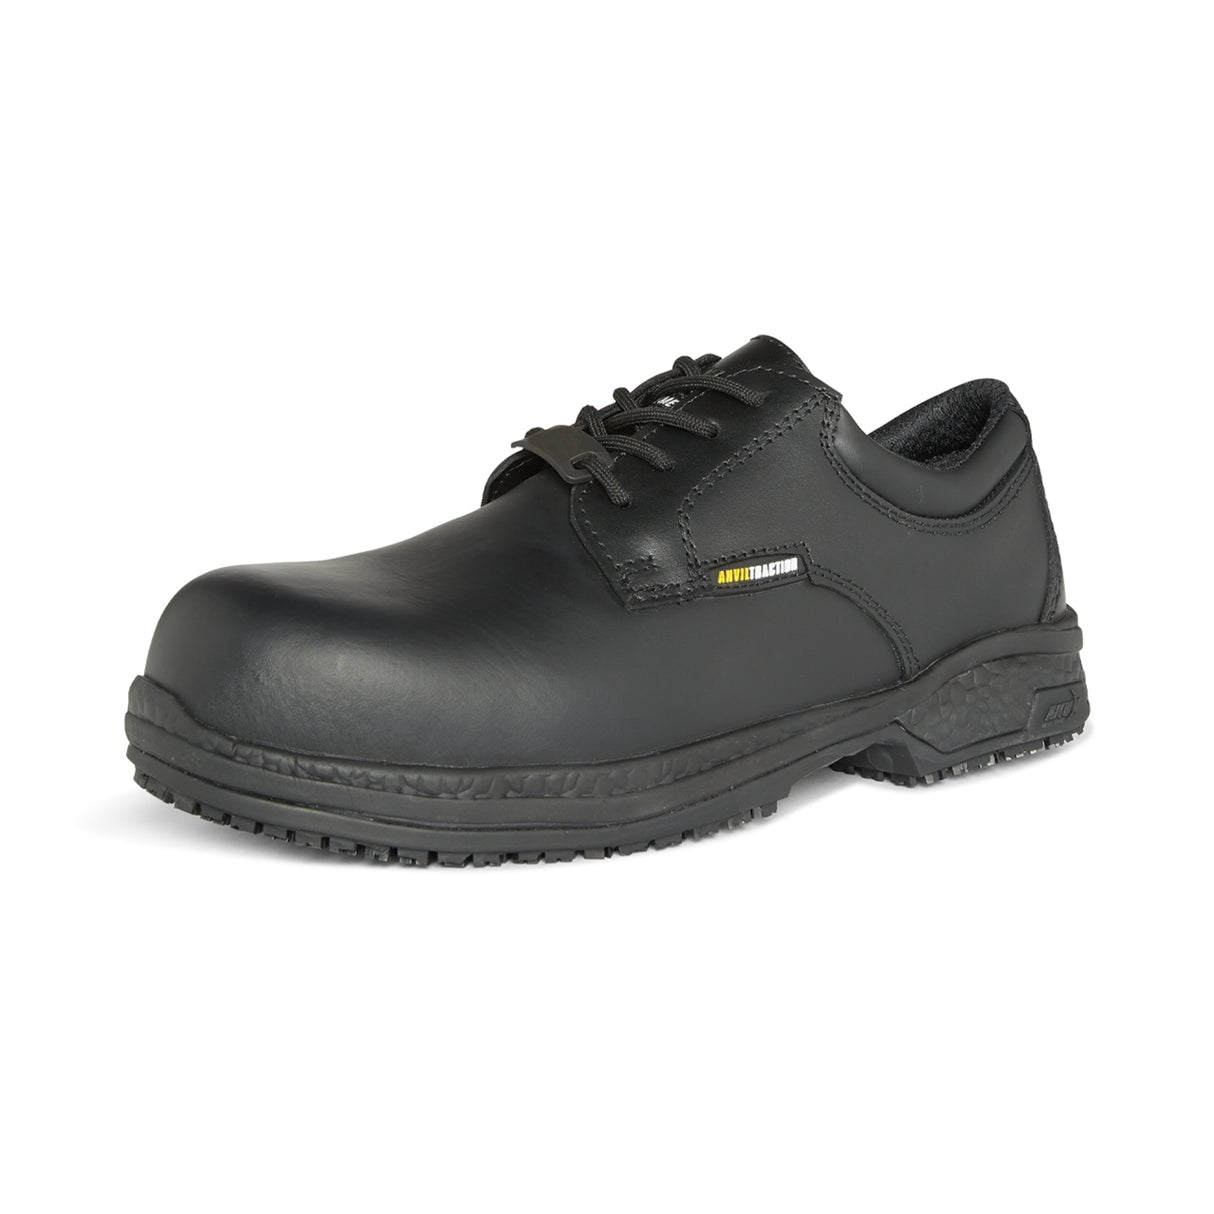 Anvil Traction Tulsa Safety Shoes Metal Free S2 SRC